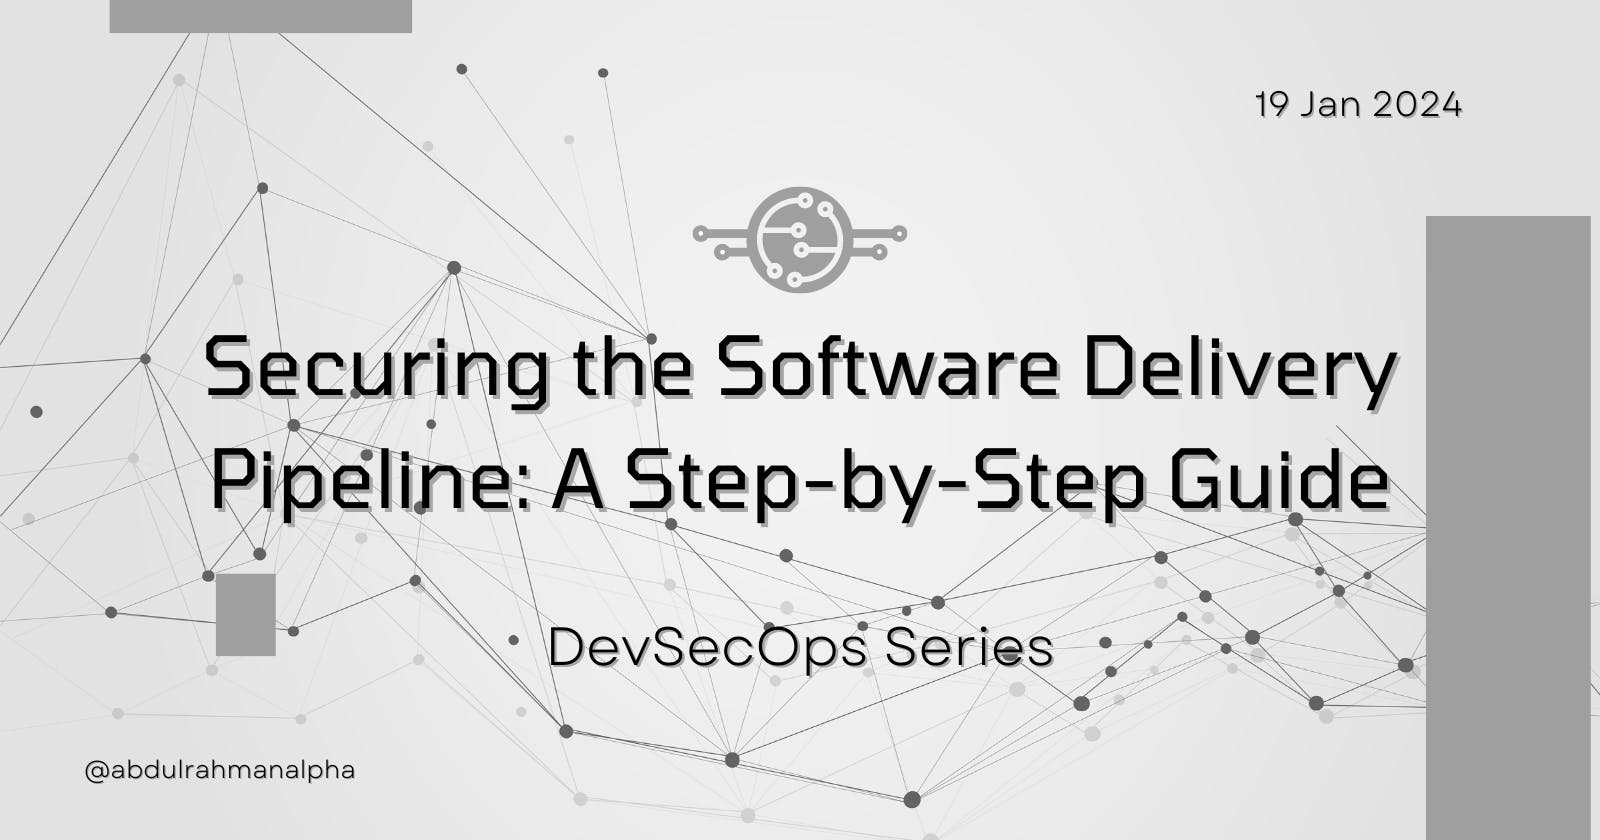 Securing the Software Delivery Pipeline: A Step-by-Step Guide